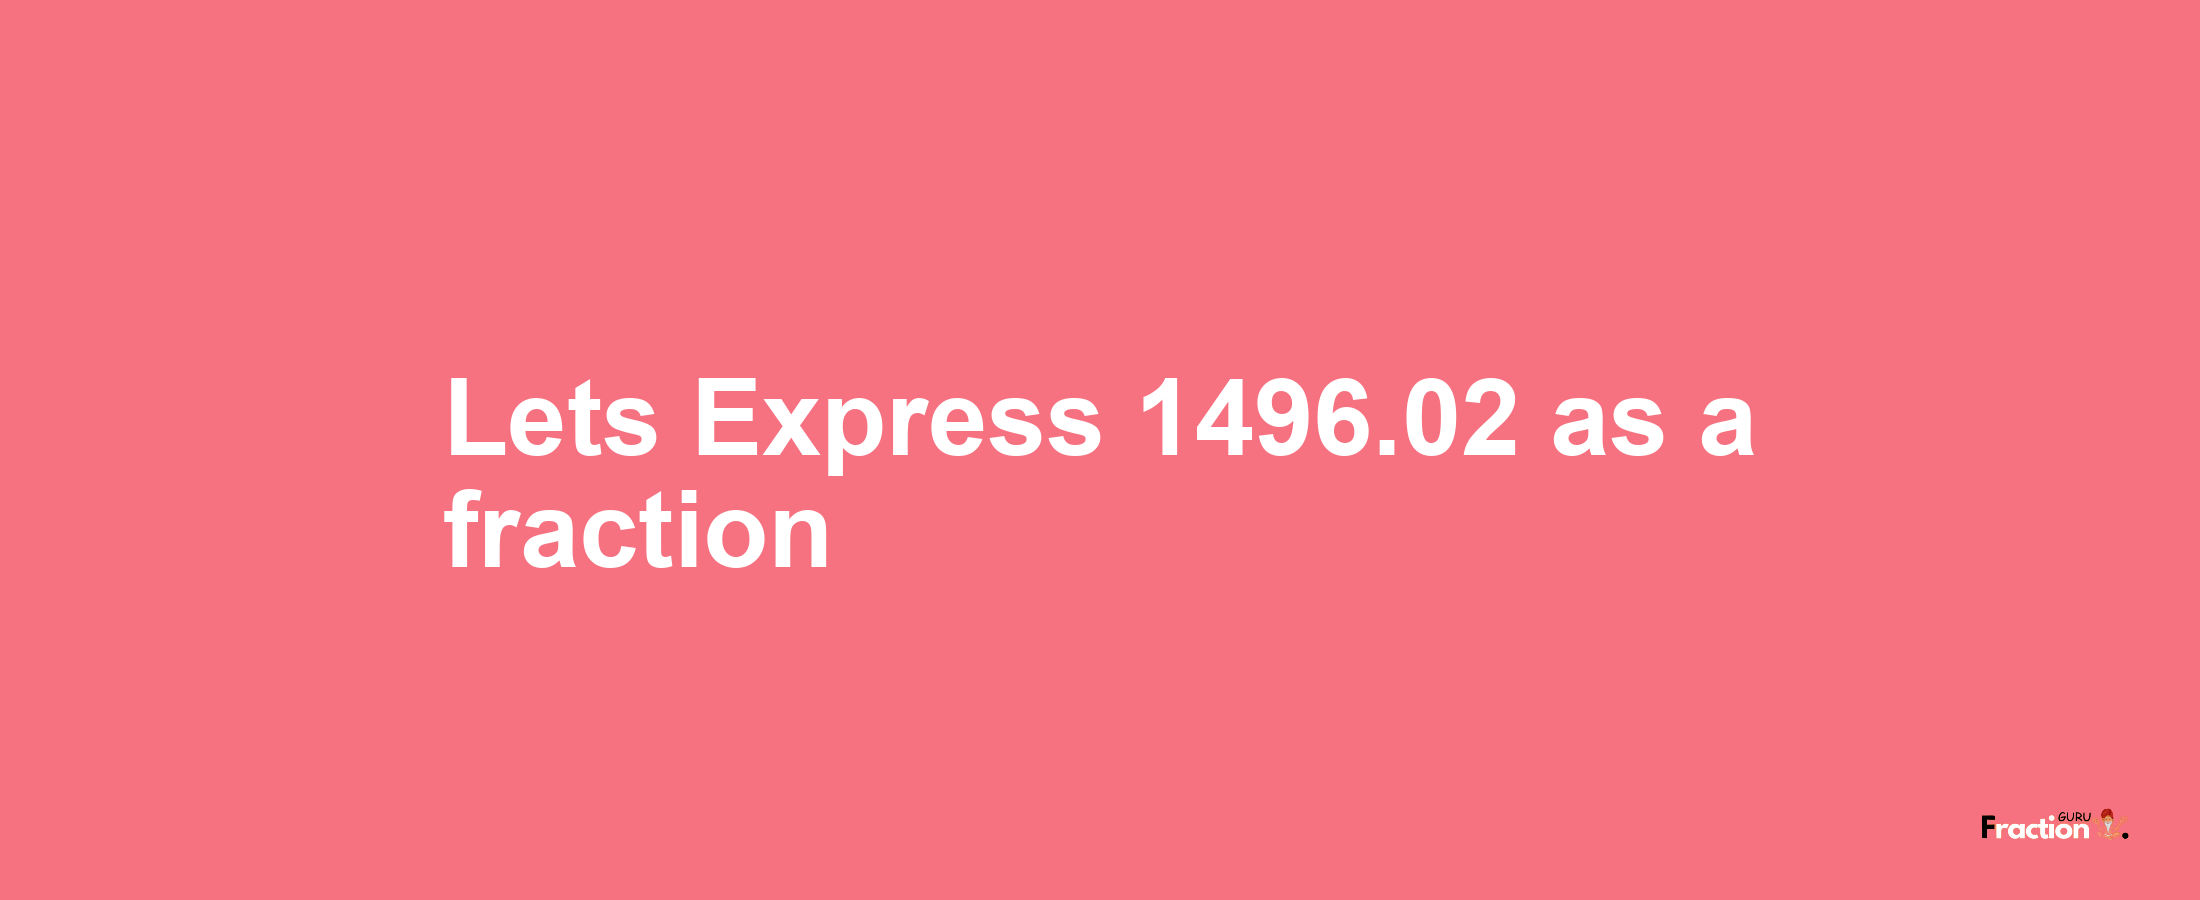 Lets Express 1496.02 as afraction